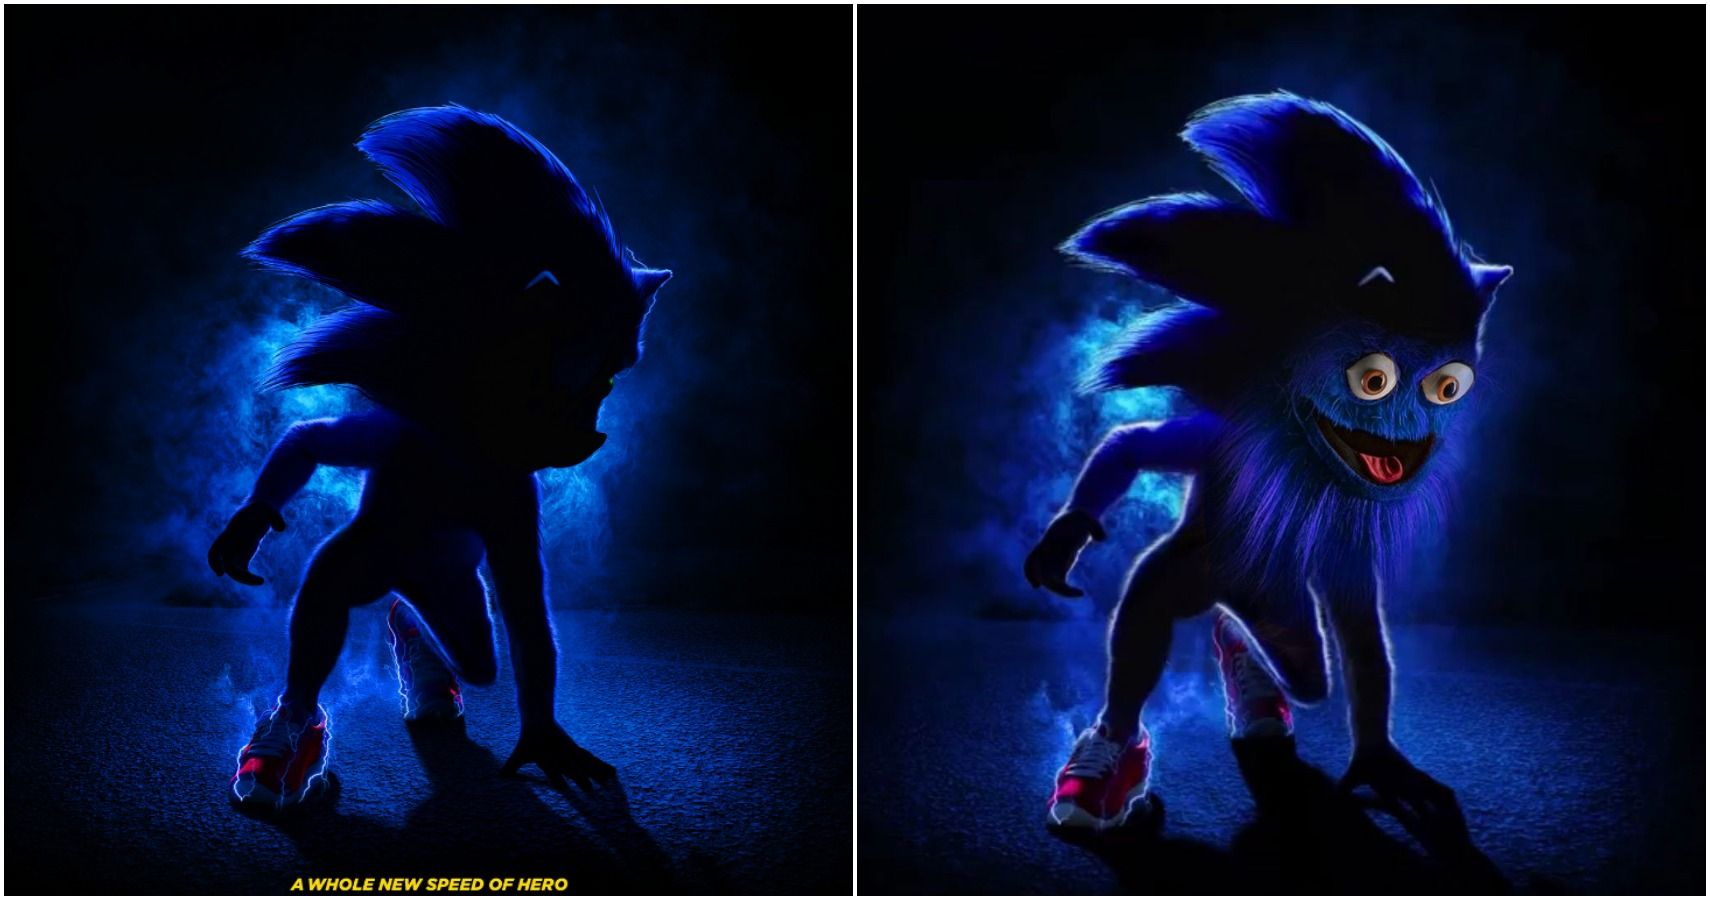 Sonic The Hedgehog Movie Poster Parodies Are Terrifying (Here Are Our Favorites)1710 x 900